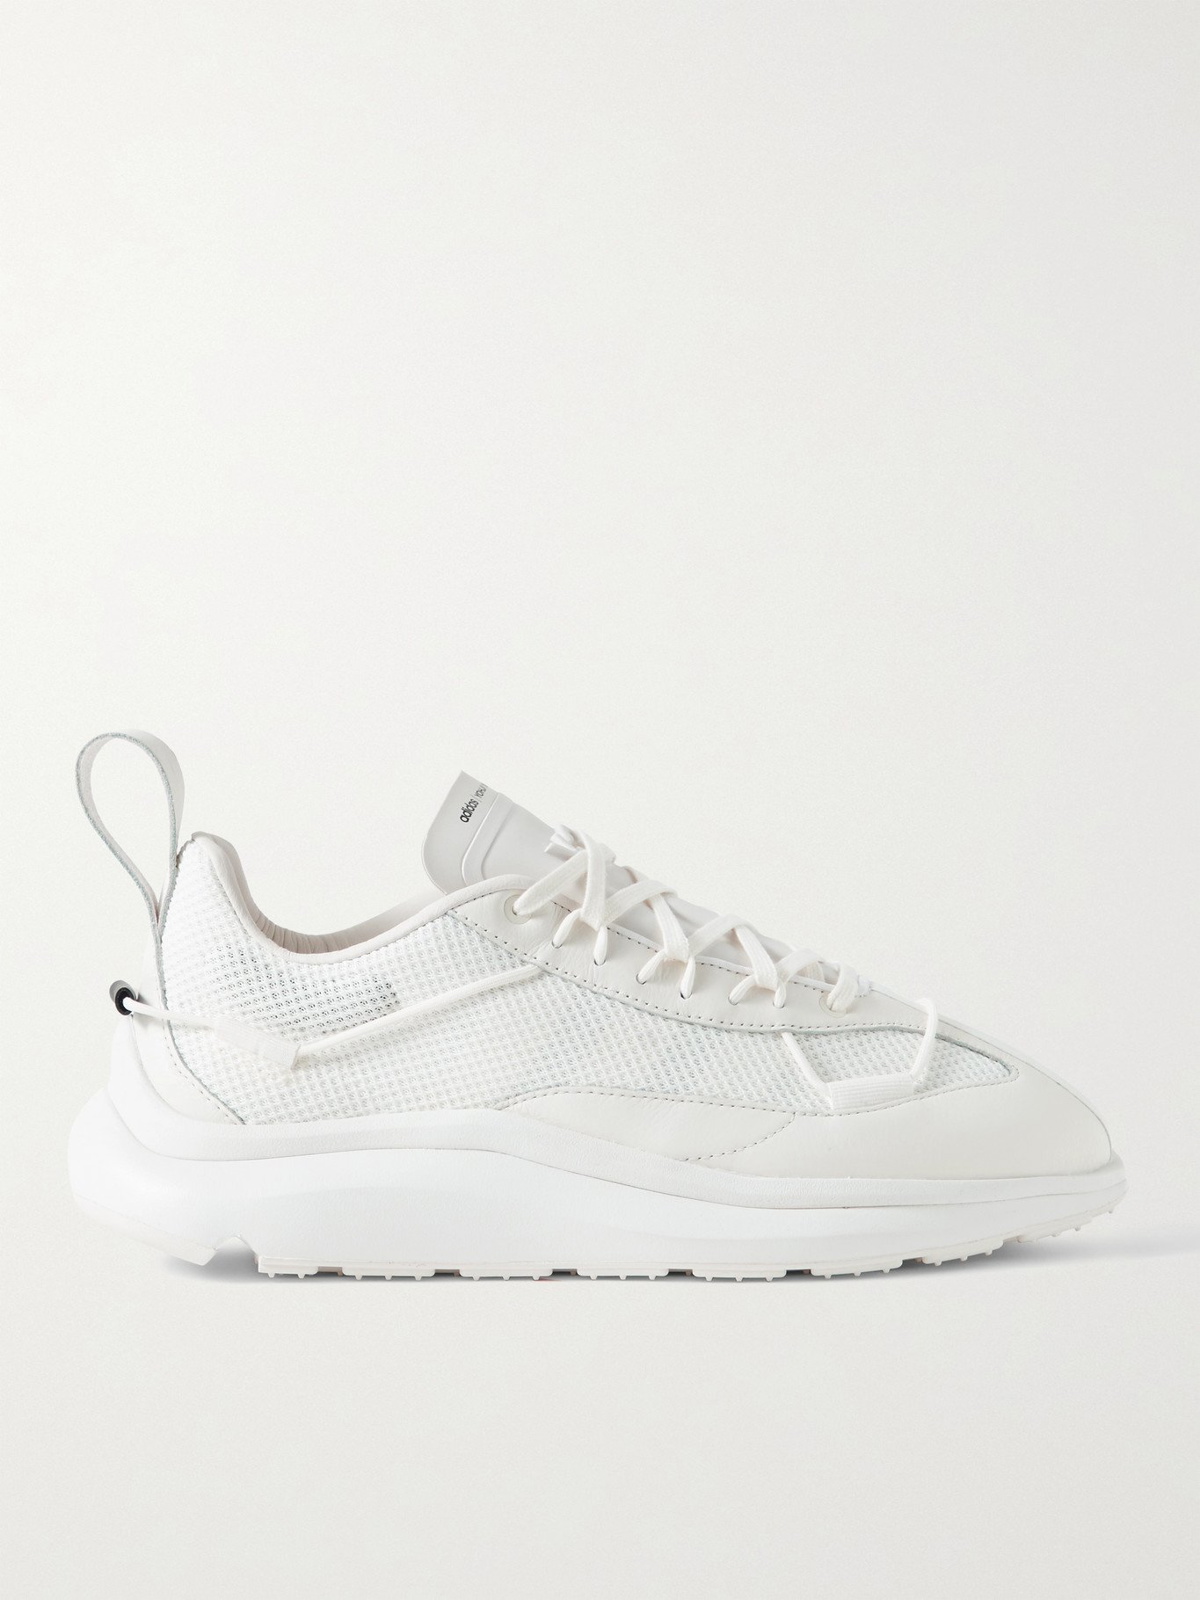 Y-3 - Shiku Run Leather-Trimmed Mesh Sneakers - White Y-3